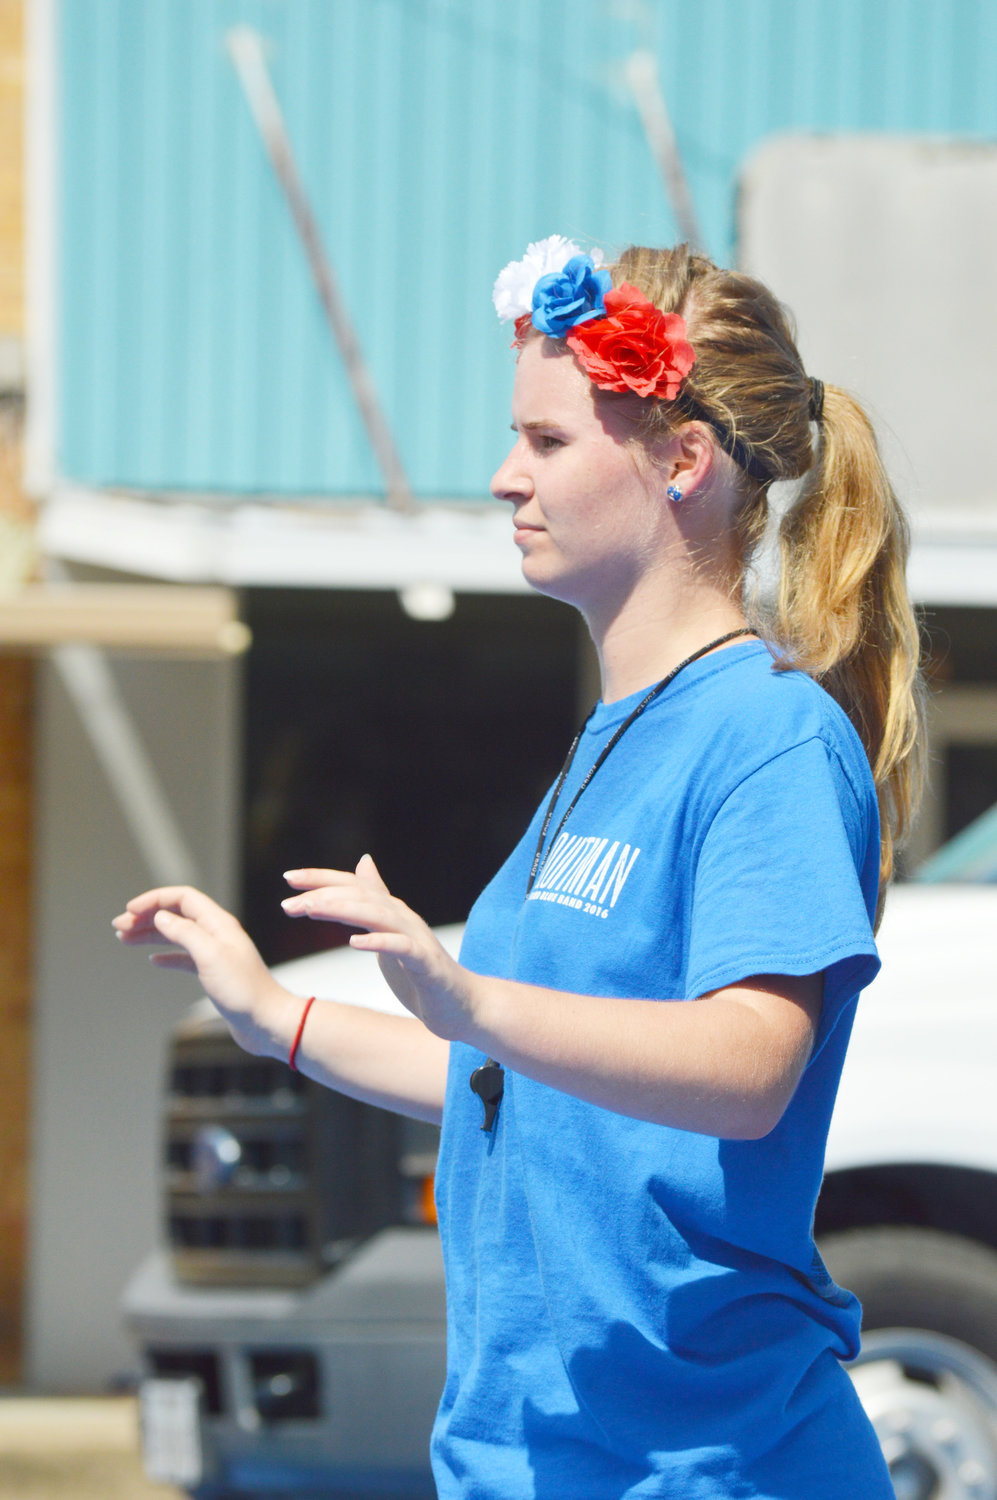 Drum major Elizabeth Turner leads the Proud Blue Band during the homecoming activities on the square in downtown Quitman.